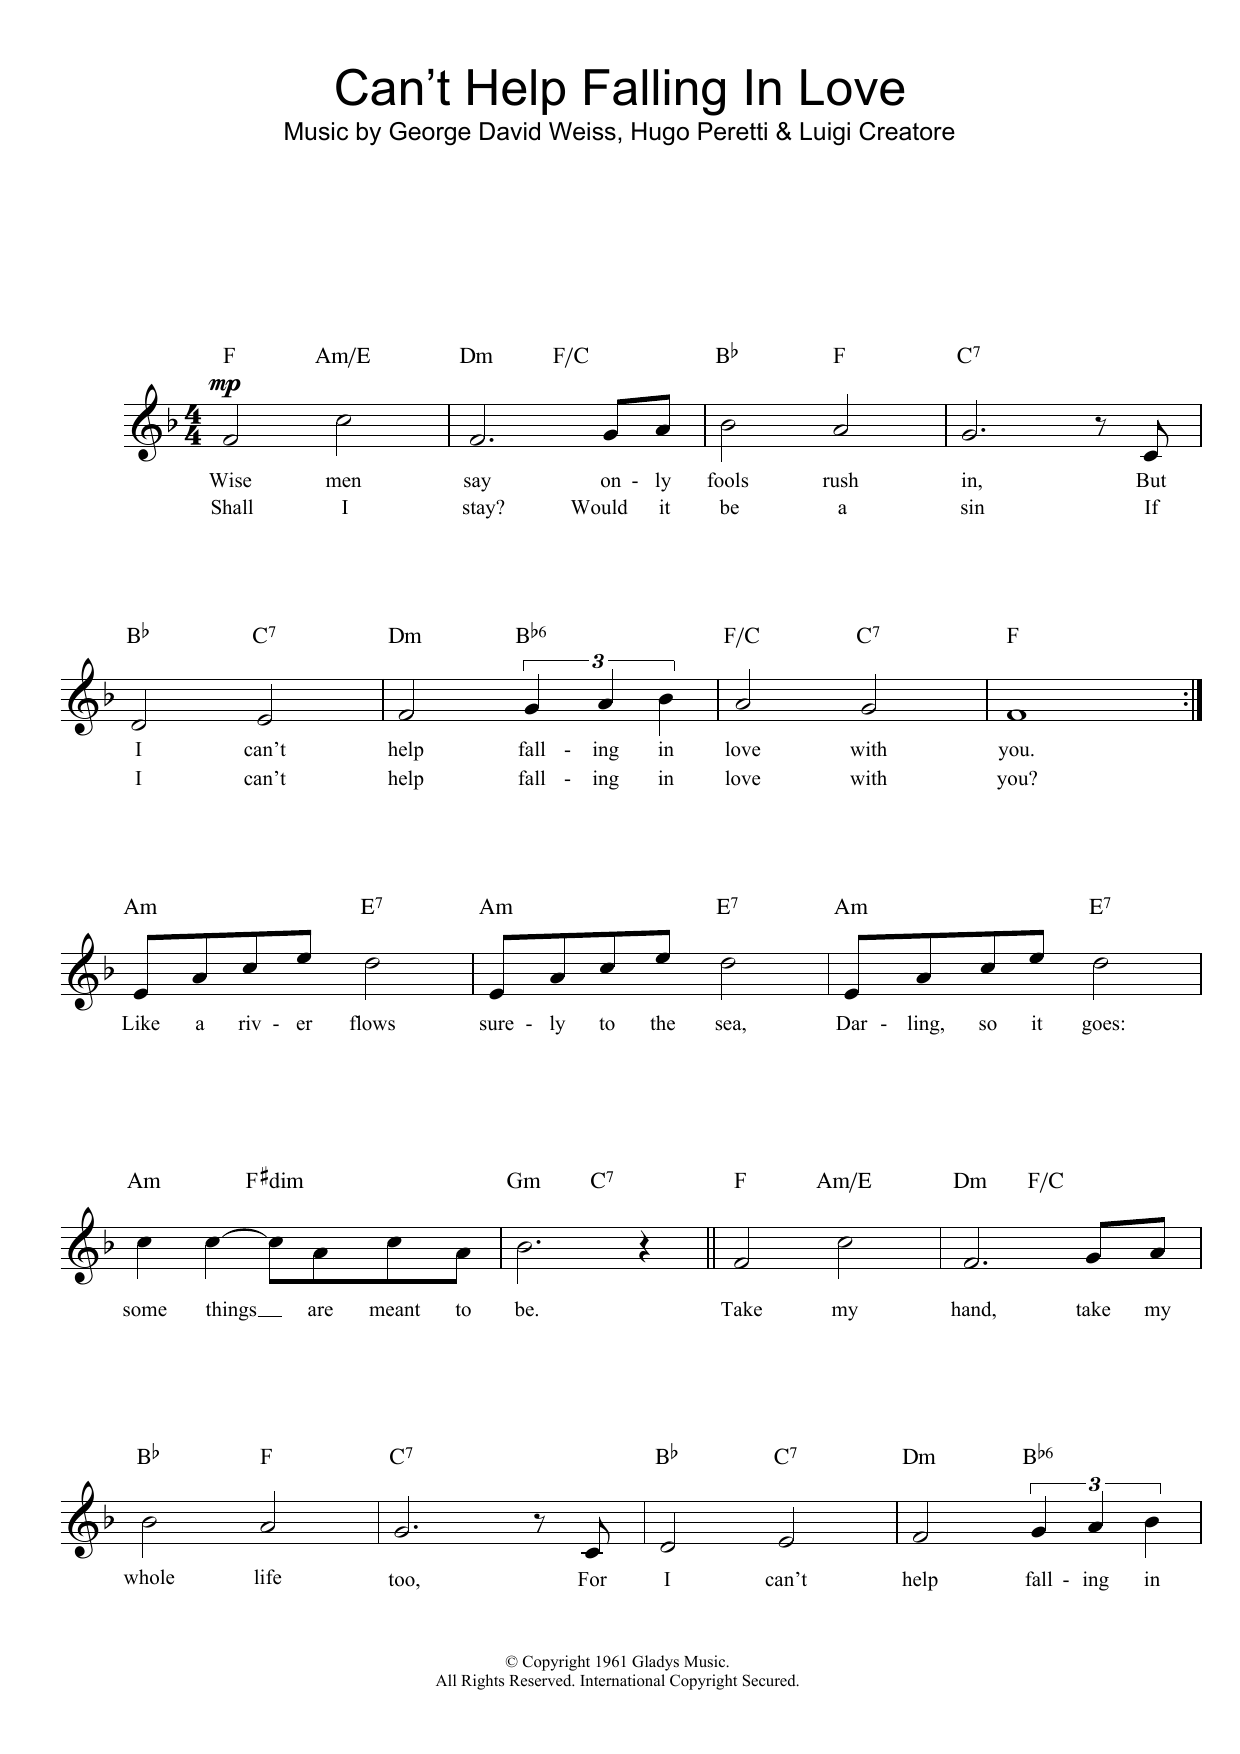 Download UB40 Can't Help Falling In Love Sheet Music